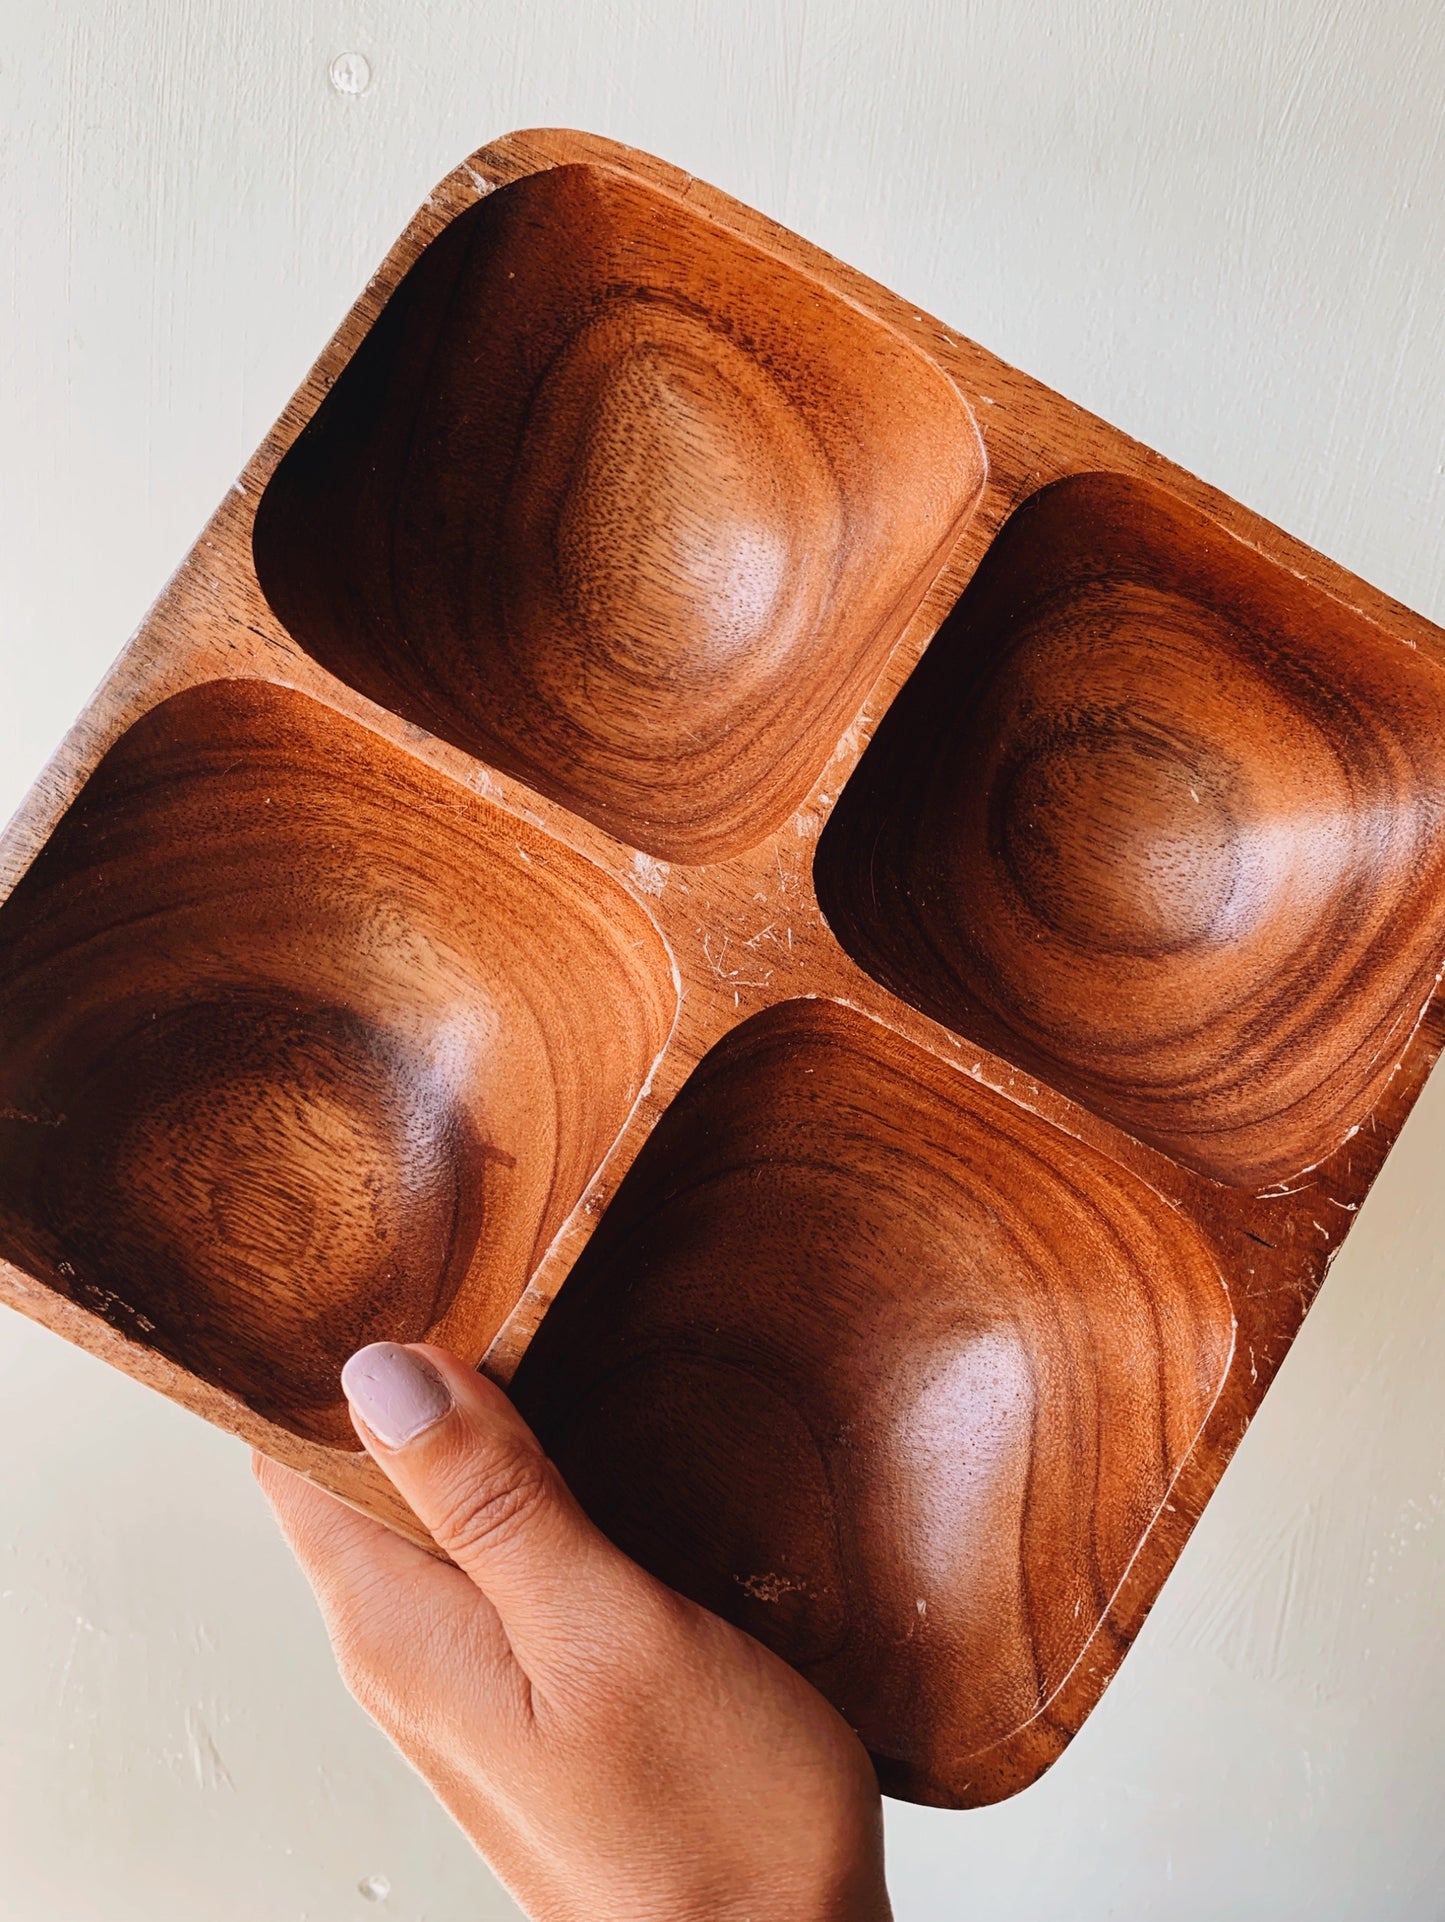 Rustic Wooden Compartment Dish